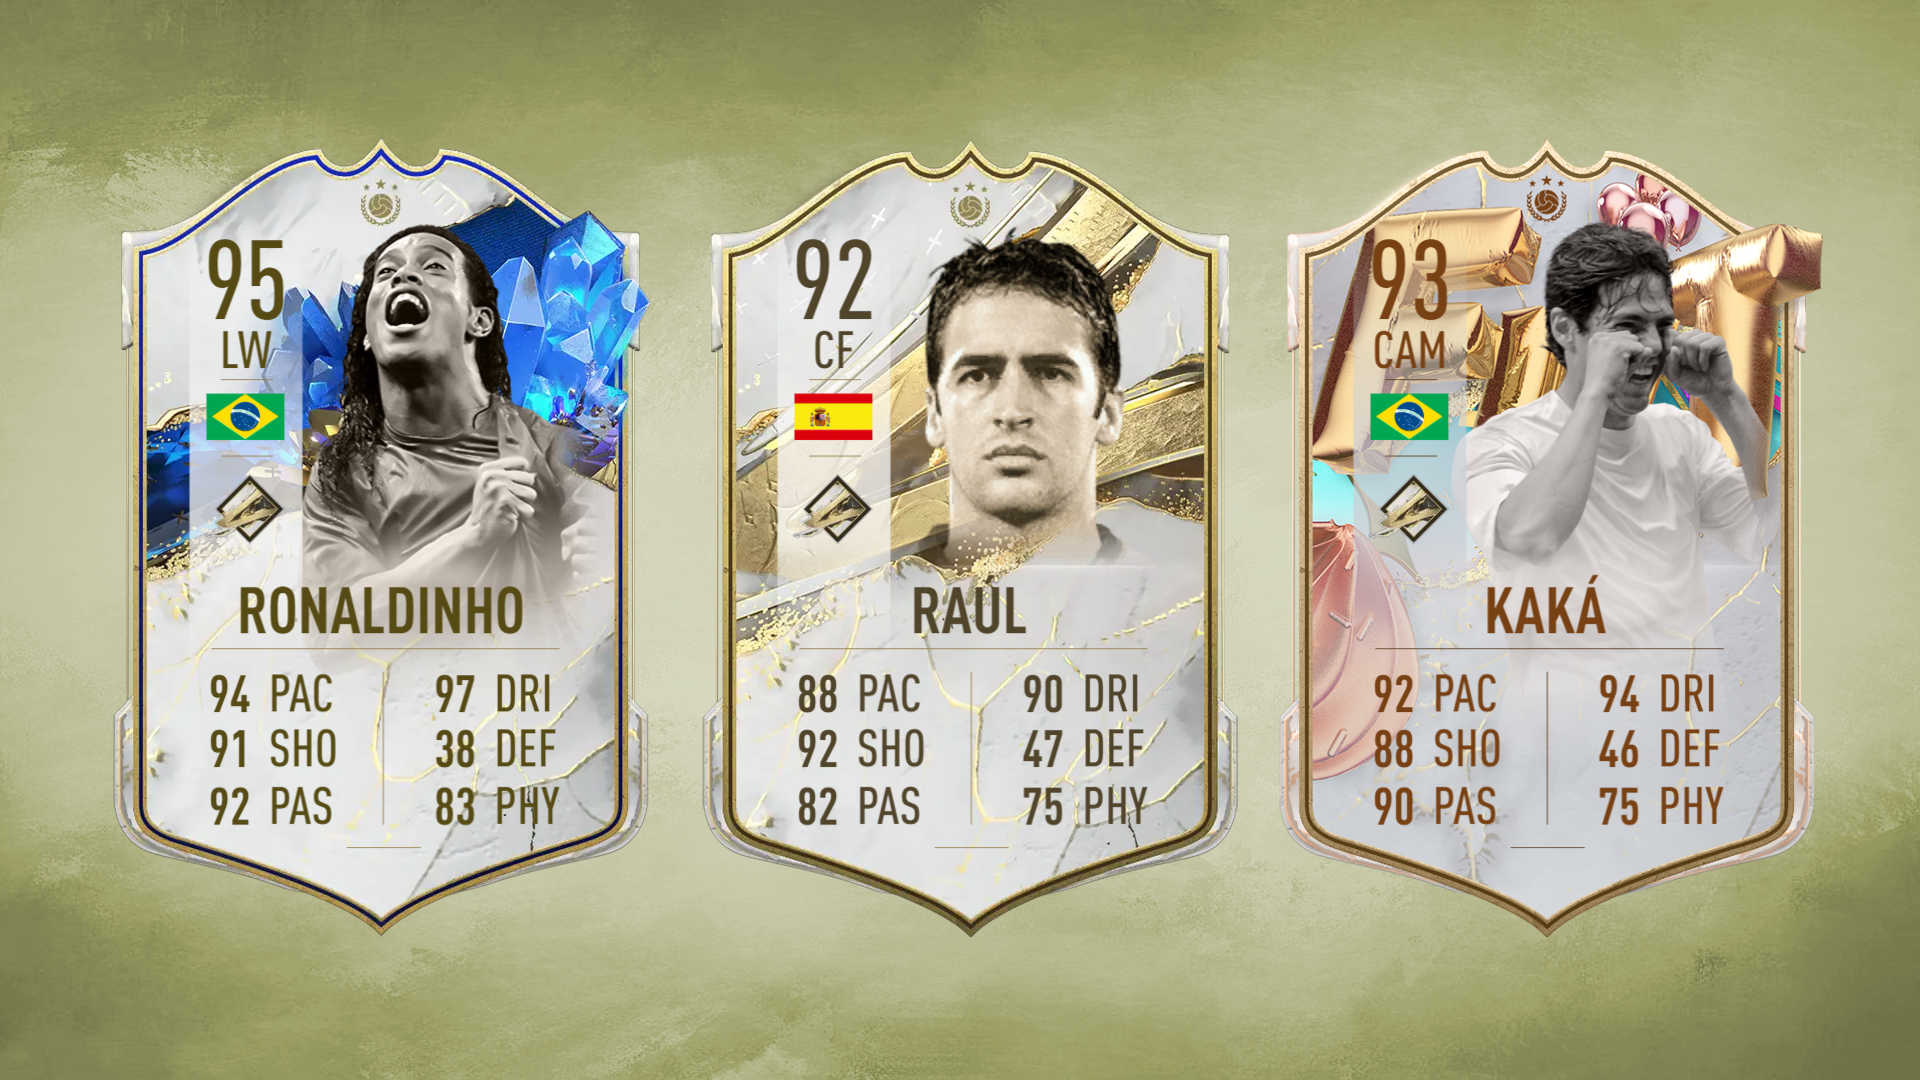 FIFA 23: Which cards could appear in “FUT 90+ Top, TOTY or Anniversary Icon Upgrade”?